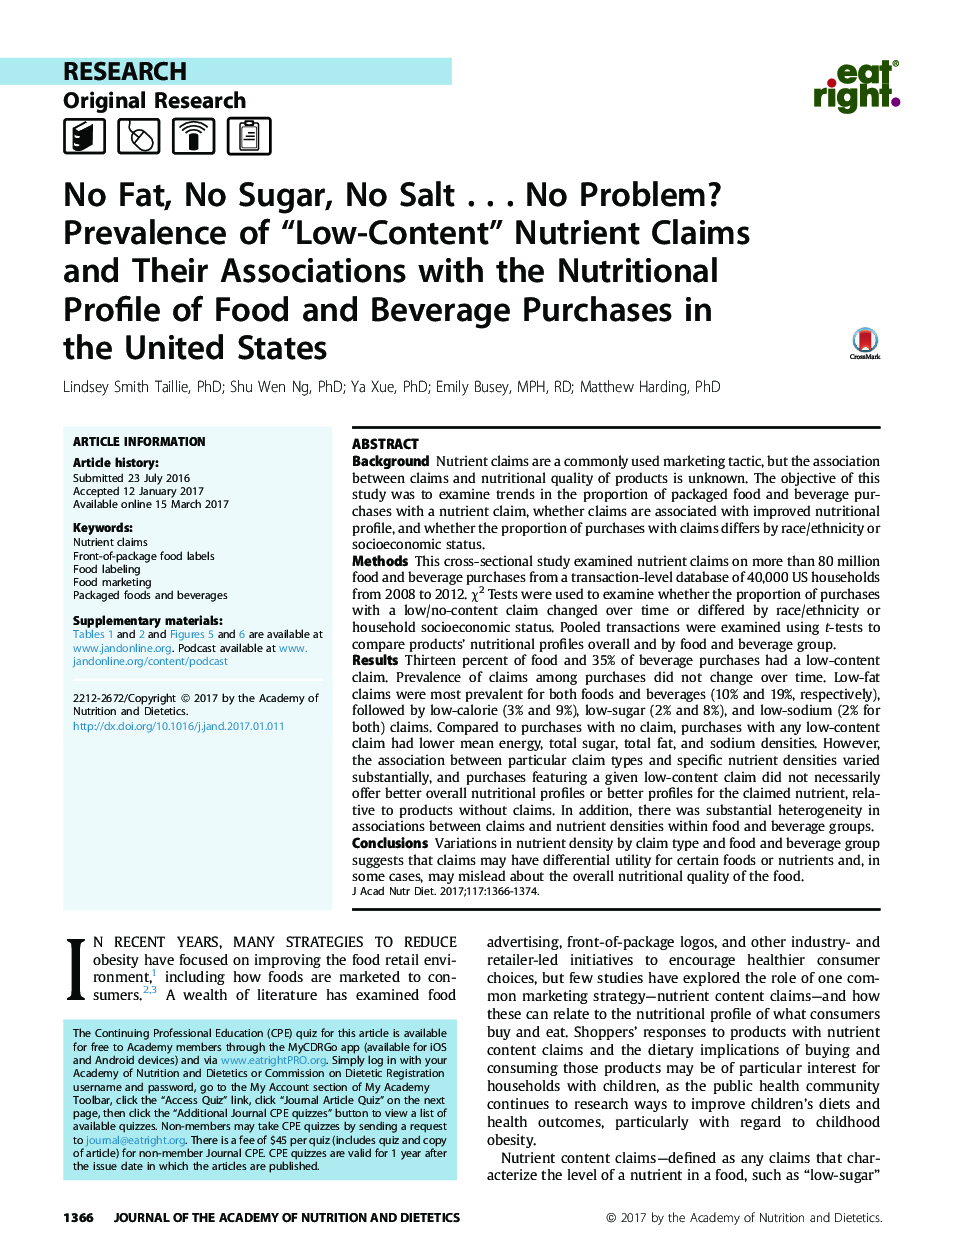 No Fat, No Sugar, No Salt . . . No Problem? Prevalence of “Low-Content” Nutrient Claims and Their Associations with the Nutritional Profile of Food and Beverage Purchases in theÂ United States